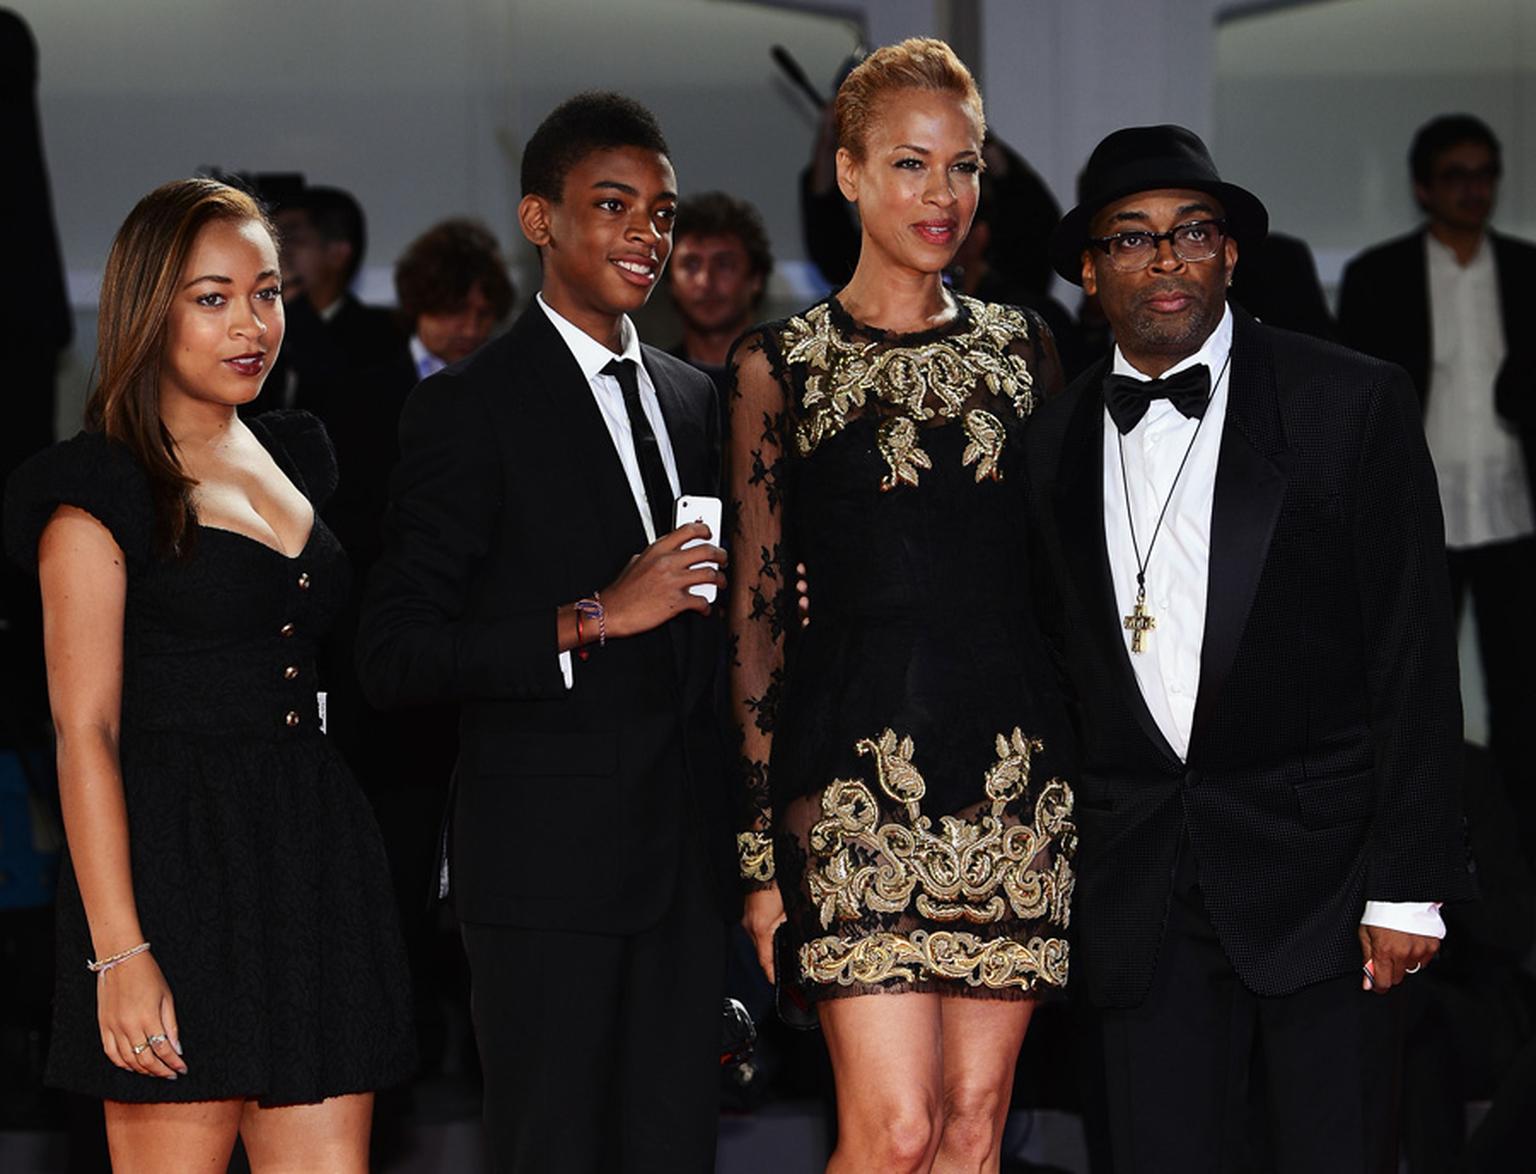 JLC-Director-Spike-Lee-and-his-daughter-Satchel-Lee,-son-Jackson-Lee-and-wife-Tonya-Lewis-attend-the-'Bad'-and-Jaeger-Le-Coultre---Glory-To-The-Filmmaker-2012-Award-during-the-69th-Venice-Film-Festival.jpg